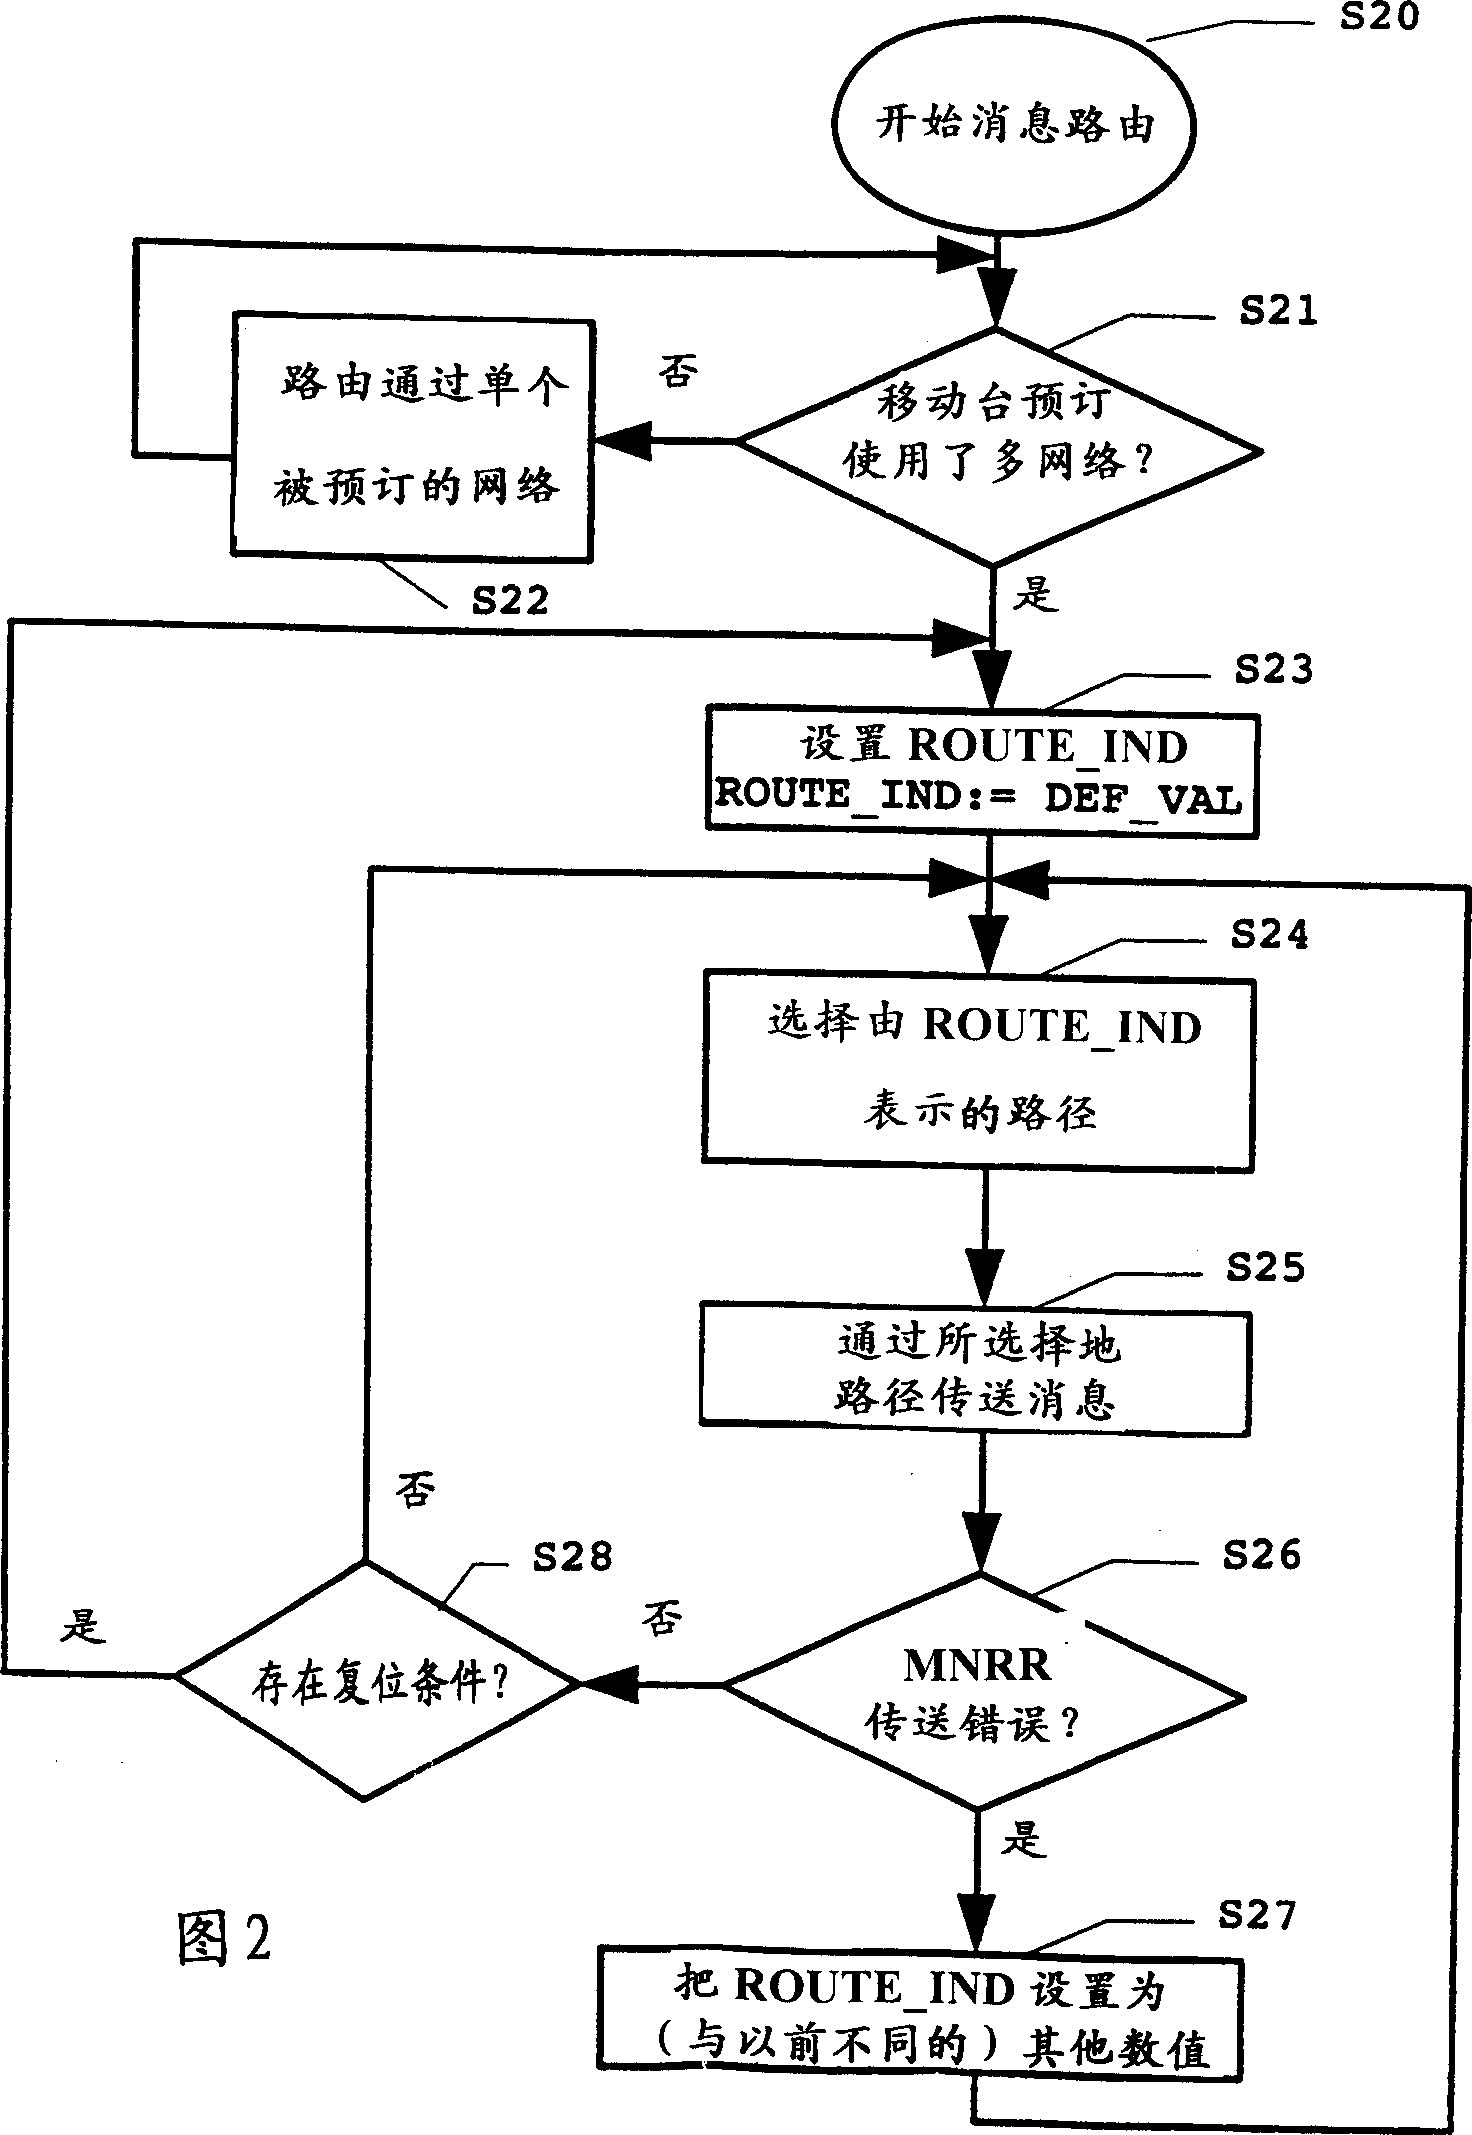 Massage routing in case of multiple network subscription